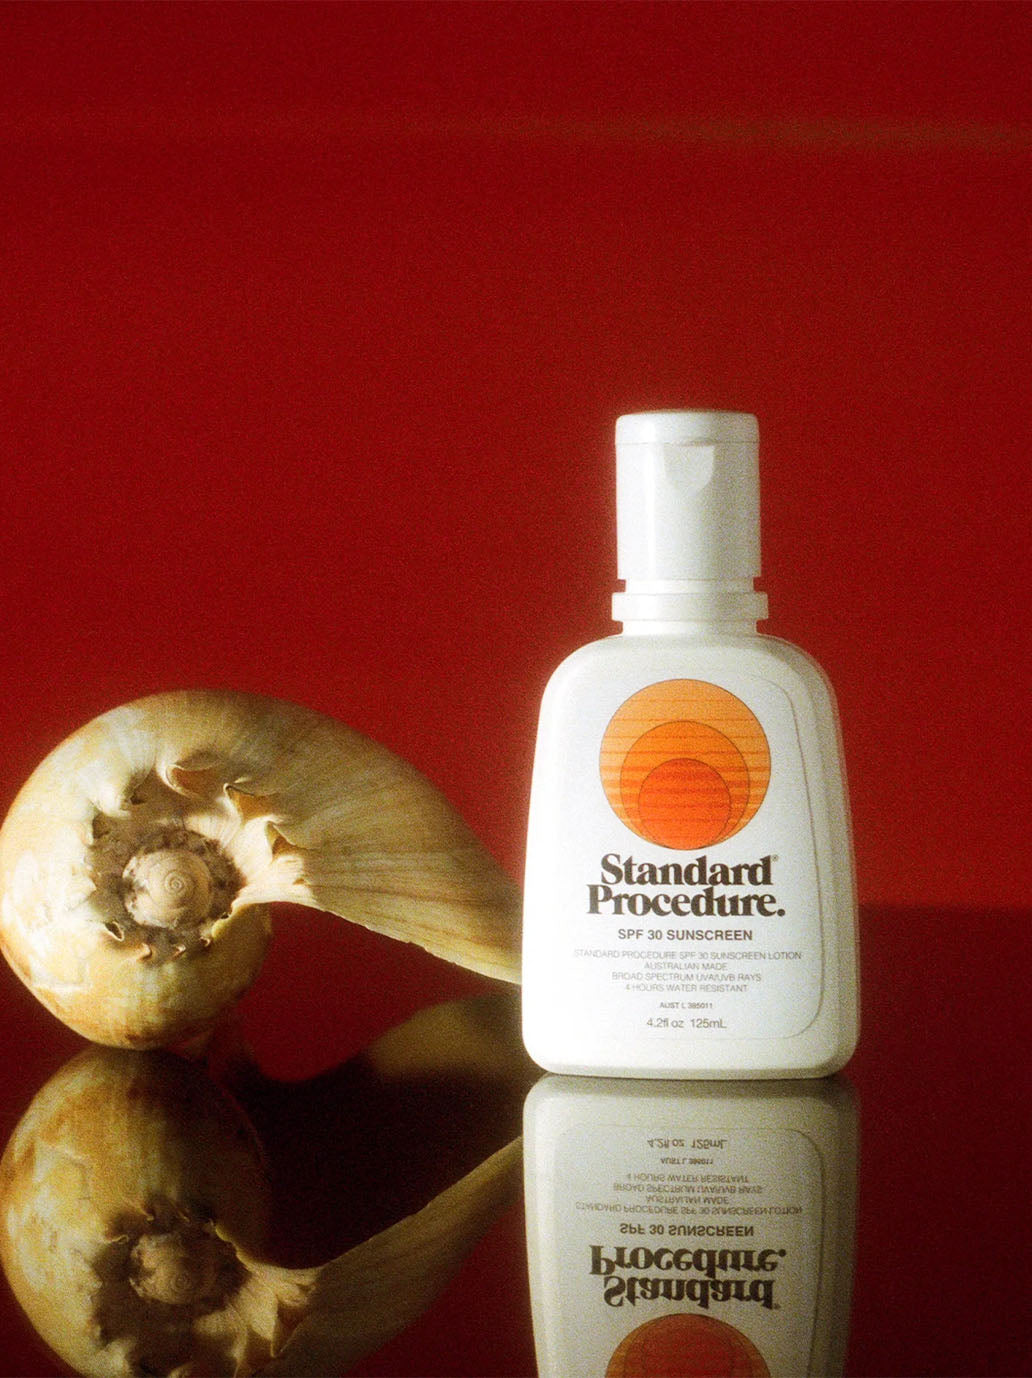 SPF 30 water resistant body lotion